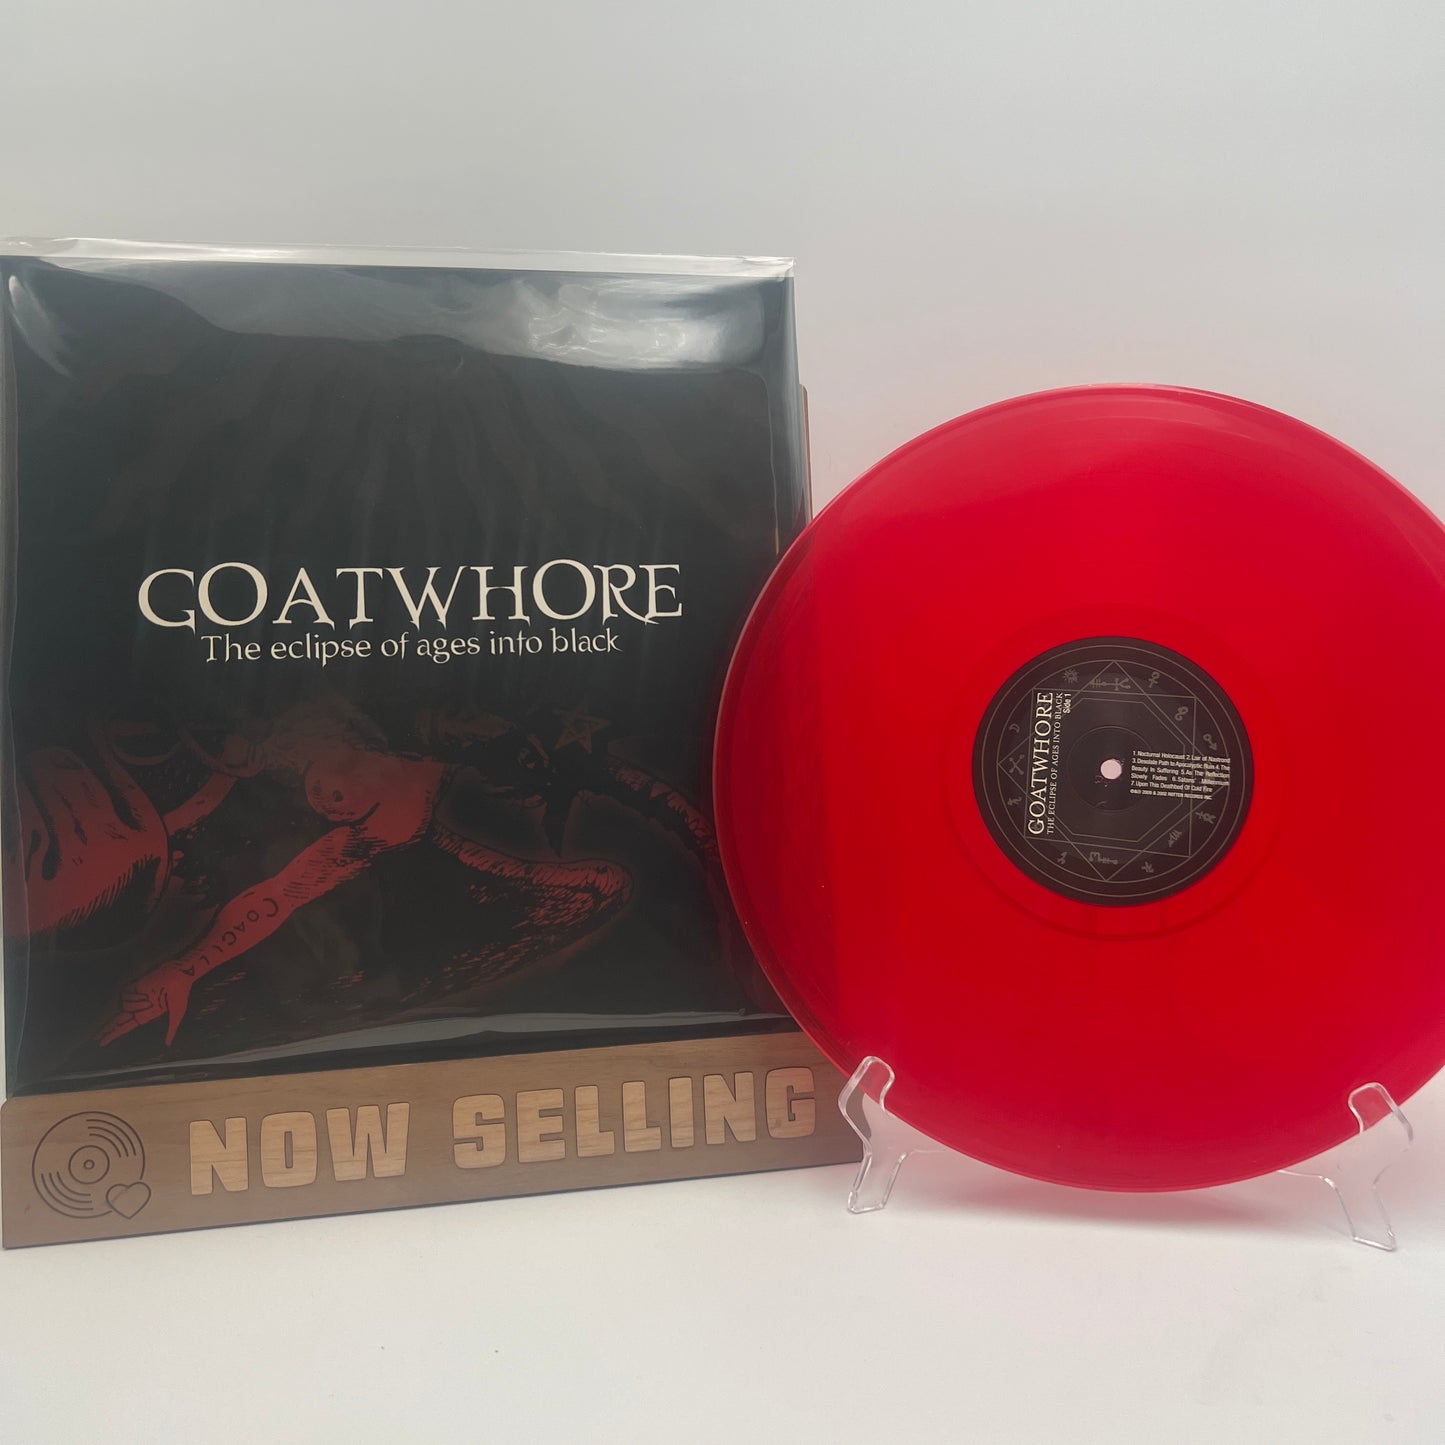 Goatwhore - The Eclipse Of Ages Into Black Vinyl LP Clear Red